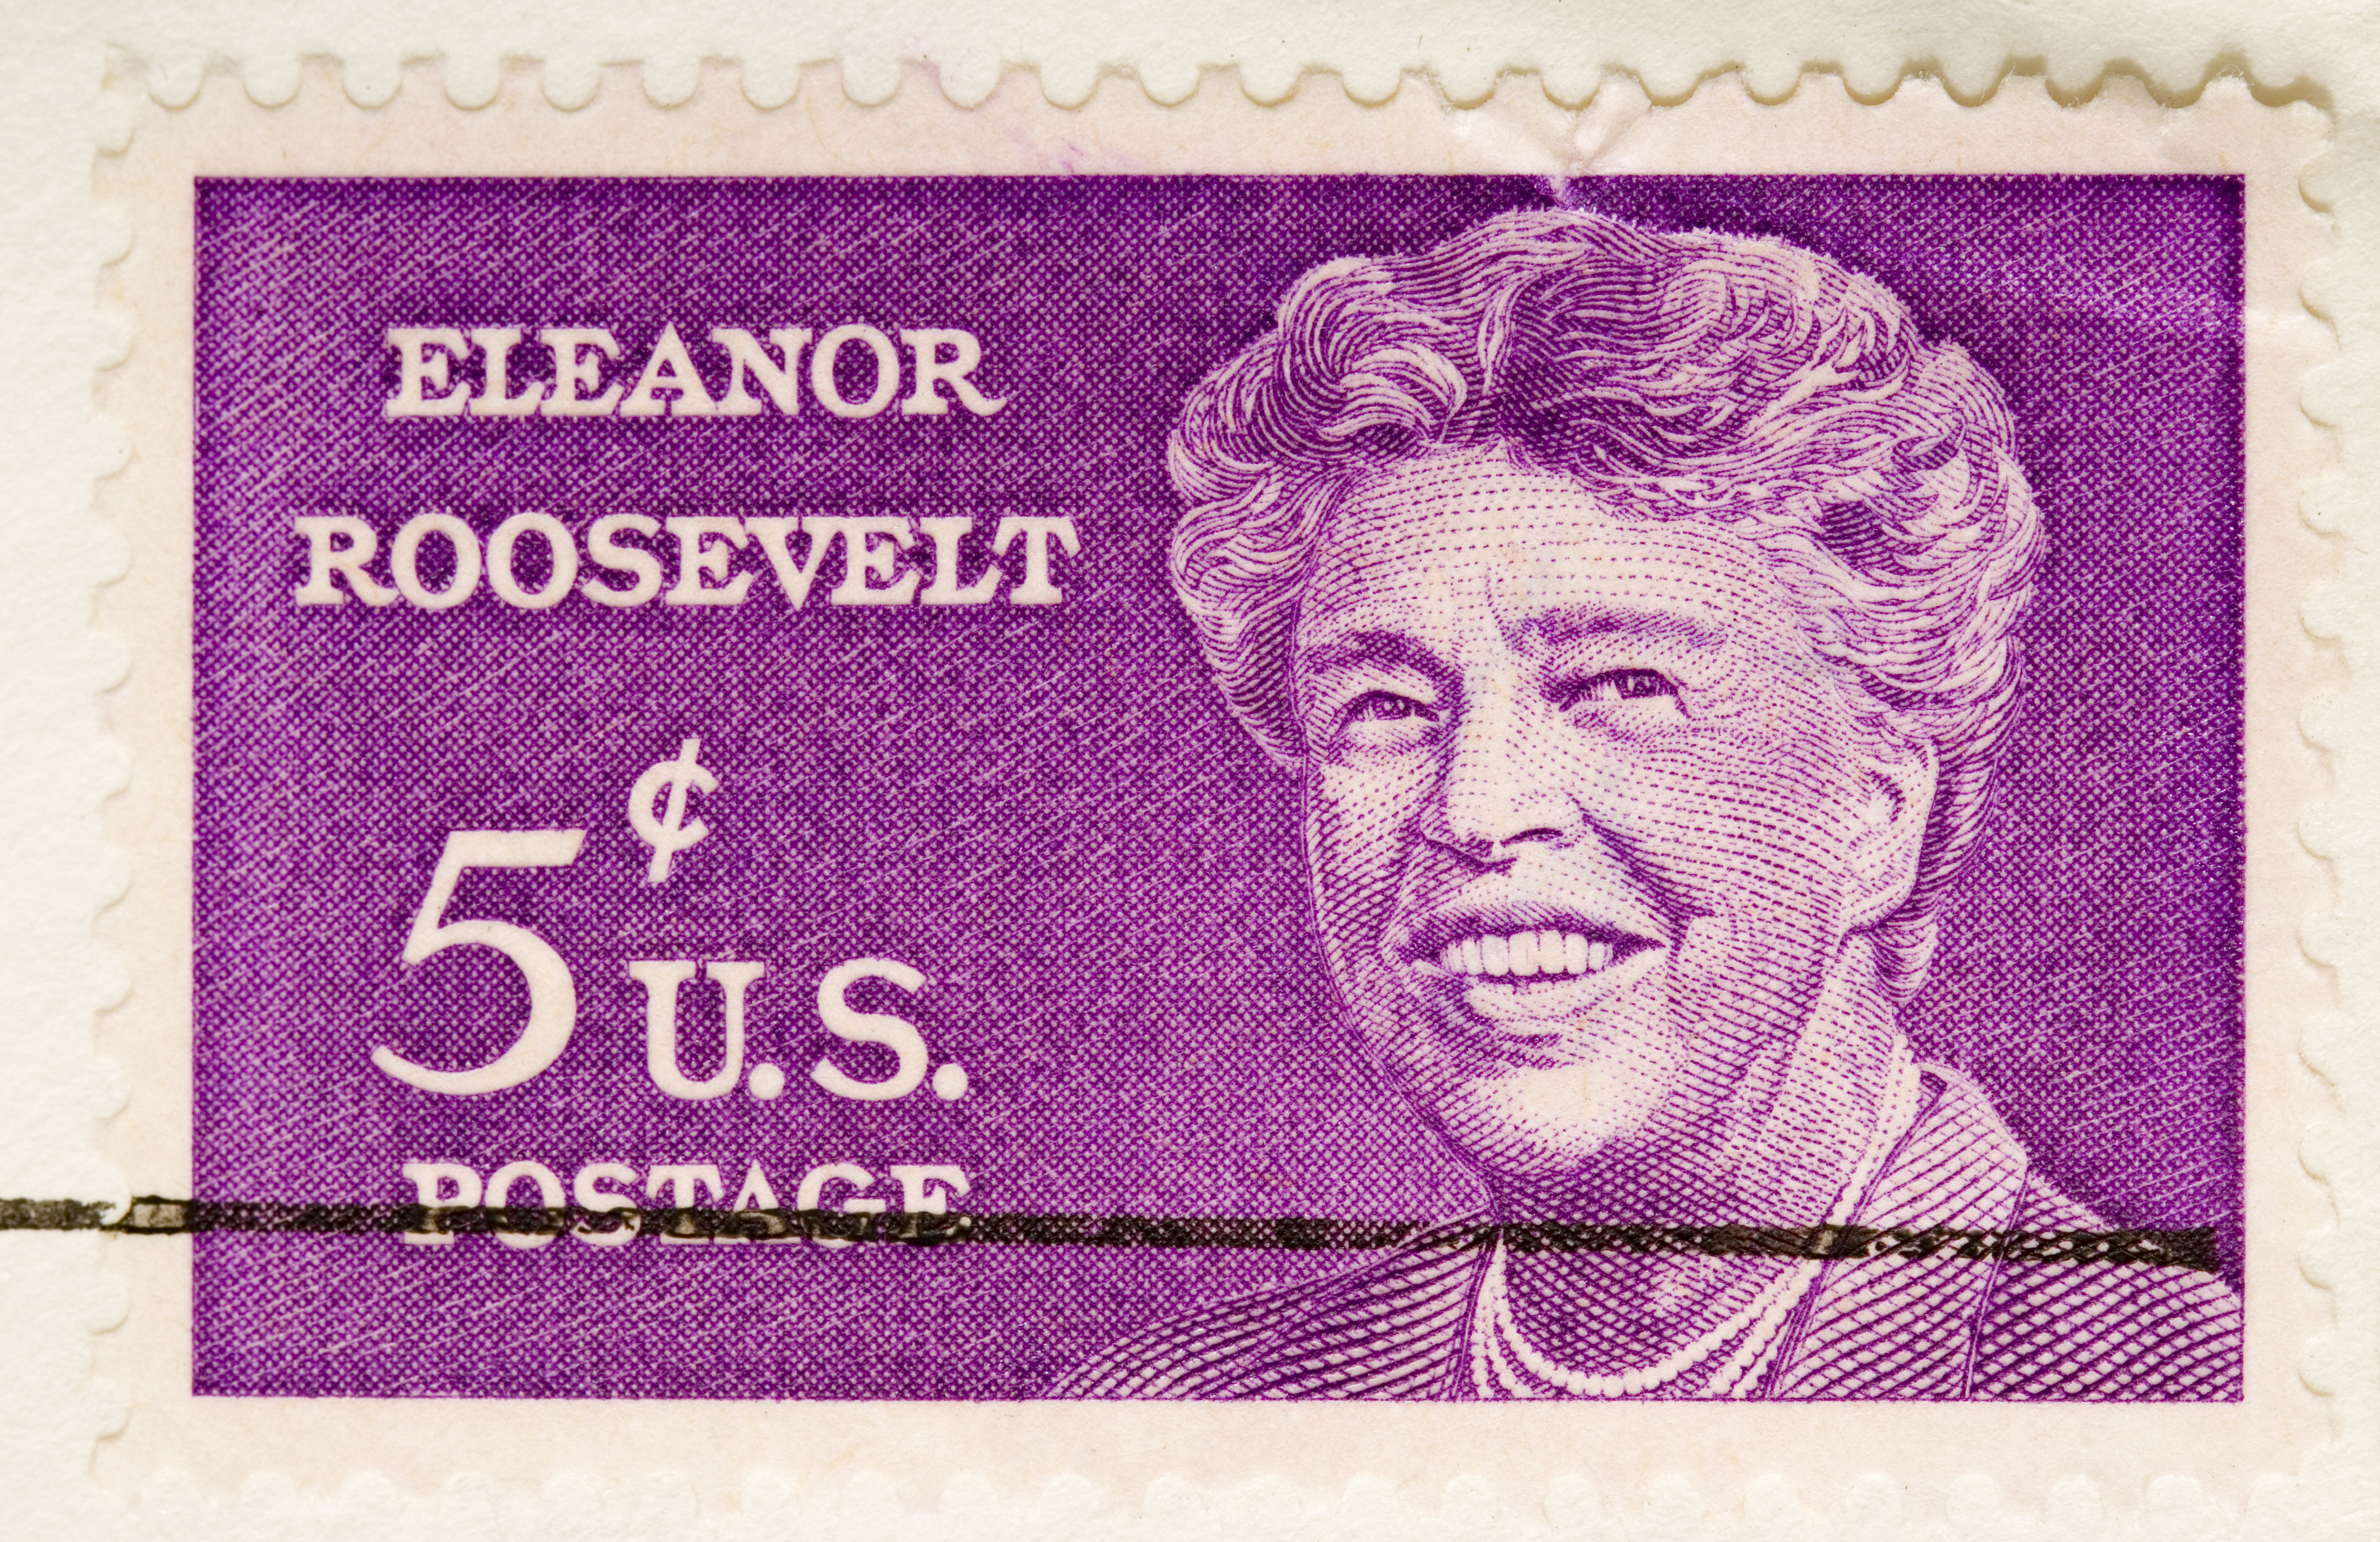 Eleanor Roosevelt Lesson Plan: Human Rights and Leadership